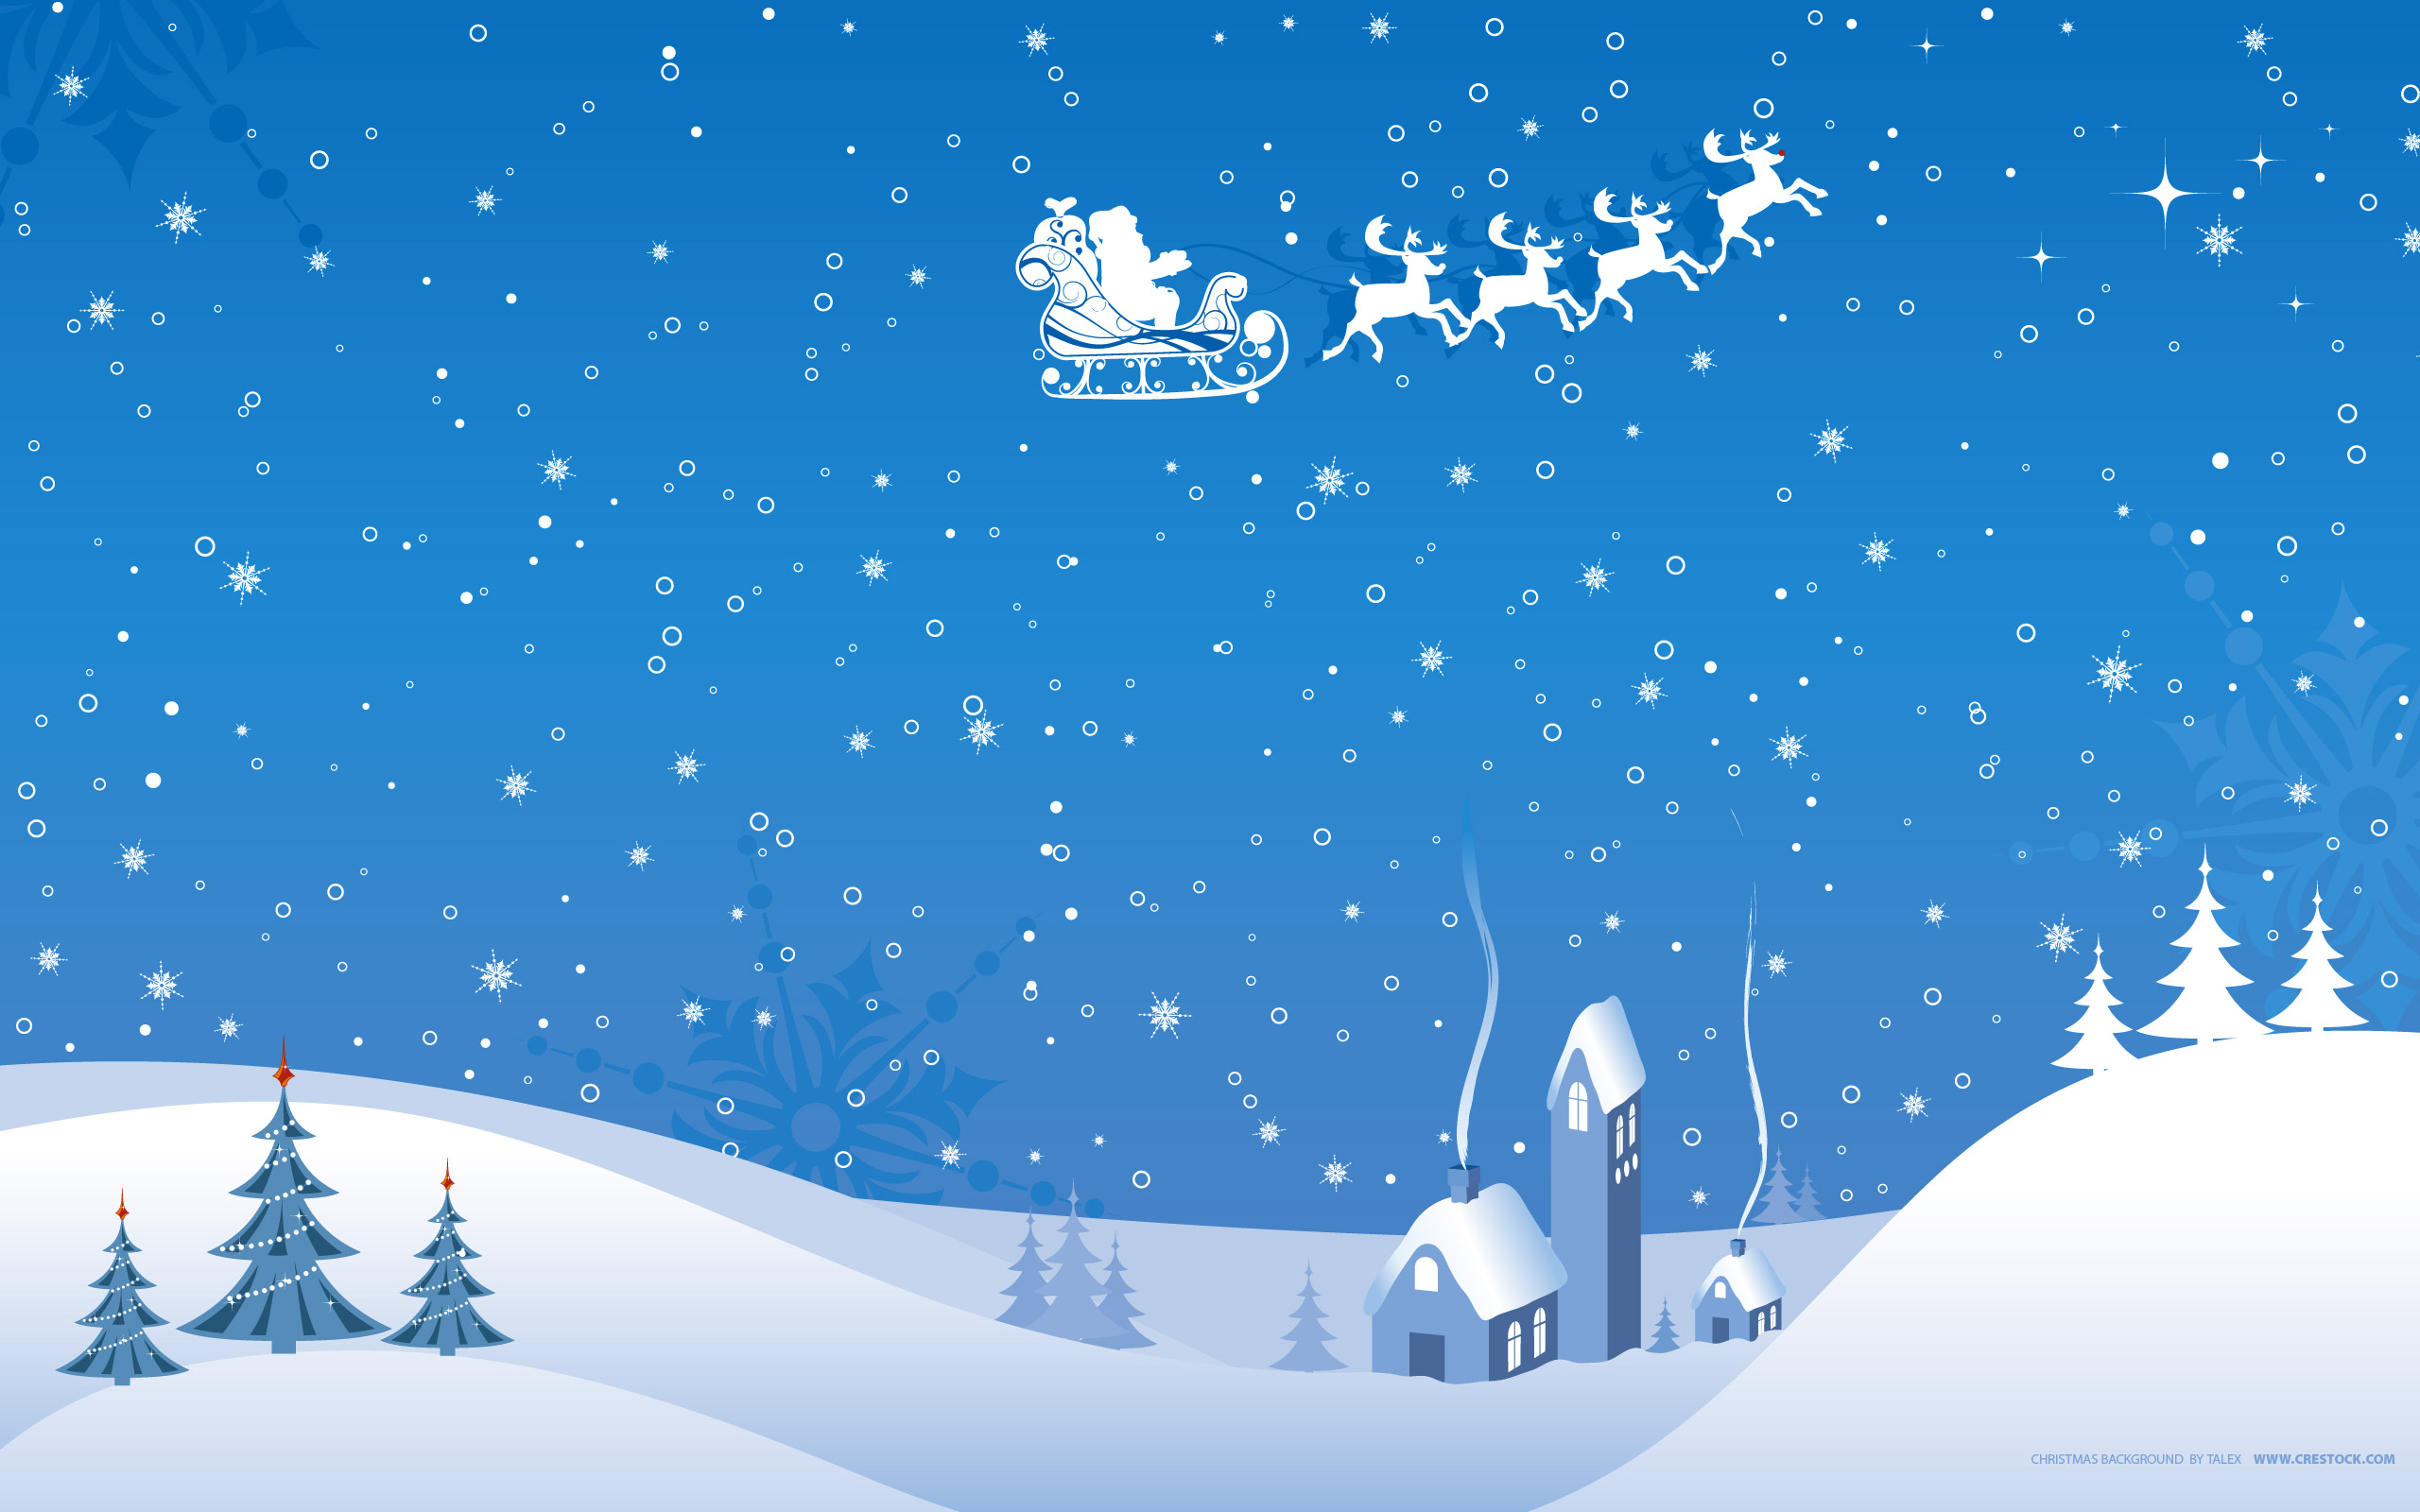 Free Christmas Backgrounds Download , HD Wallpaper & Backgrounds